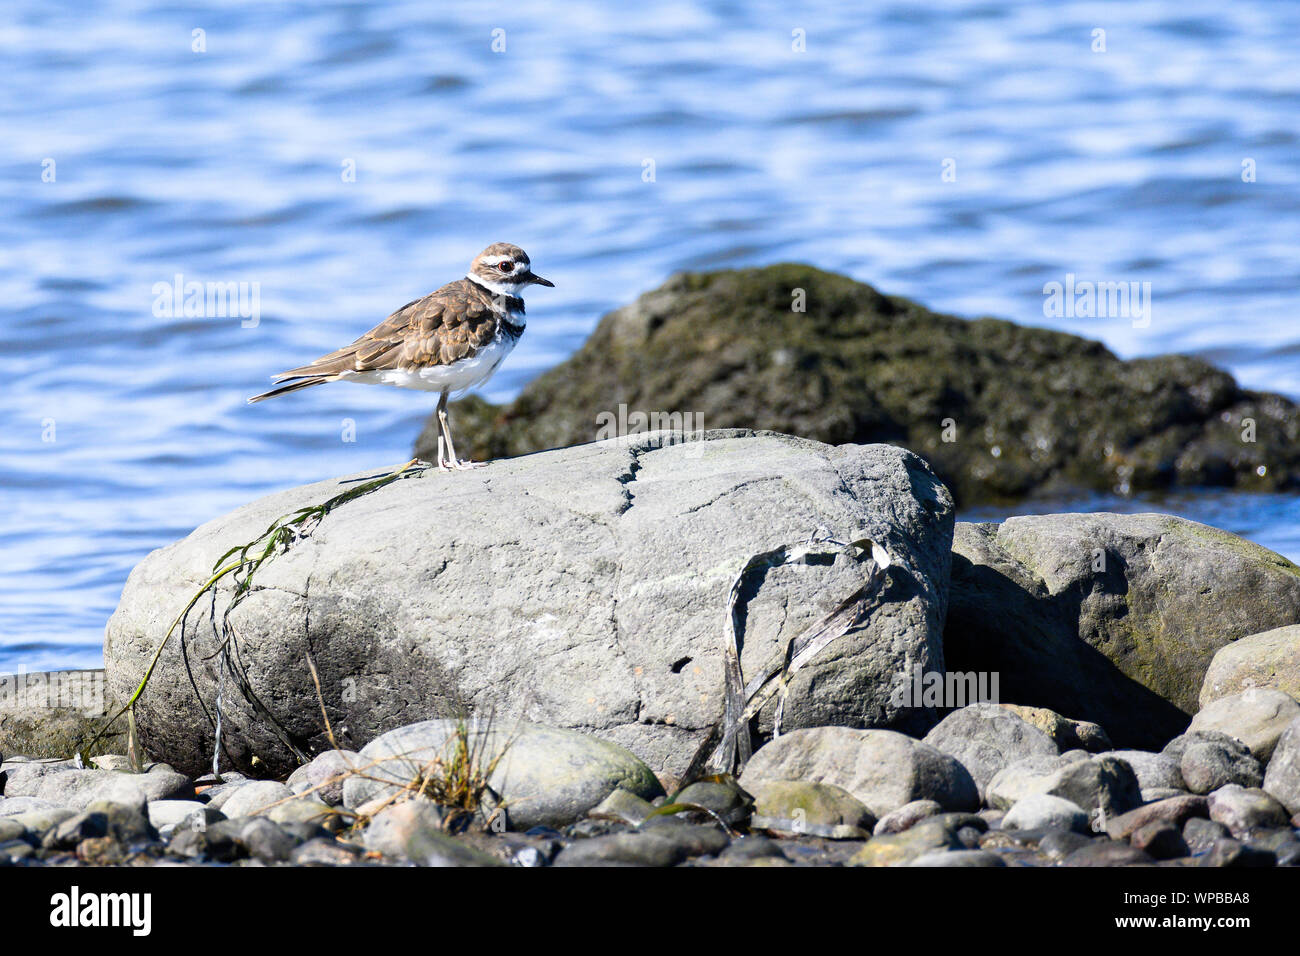 A Killdeer on the shore of Comox Harbour Stock Photo